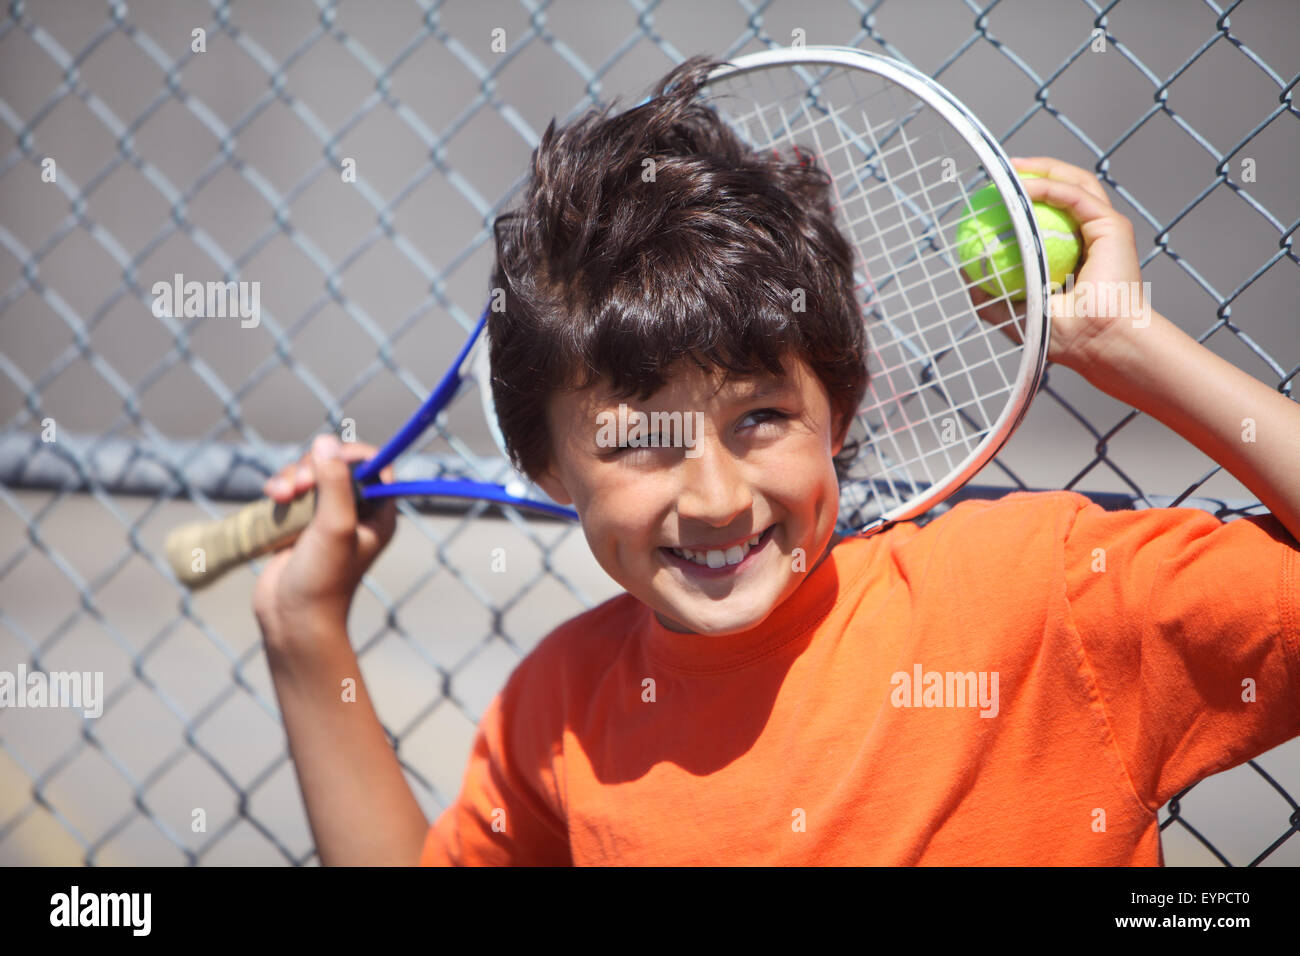 Young happy smiling boy outside in sun with tennis racket and ball Stock Photo